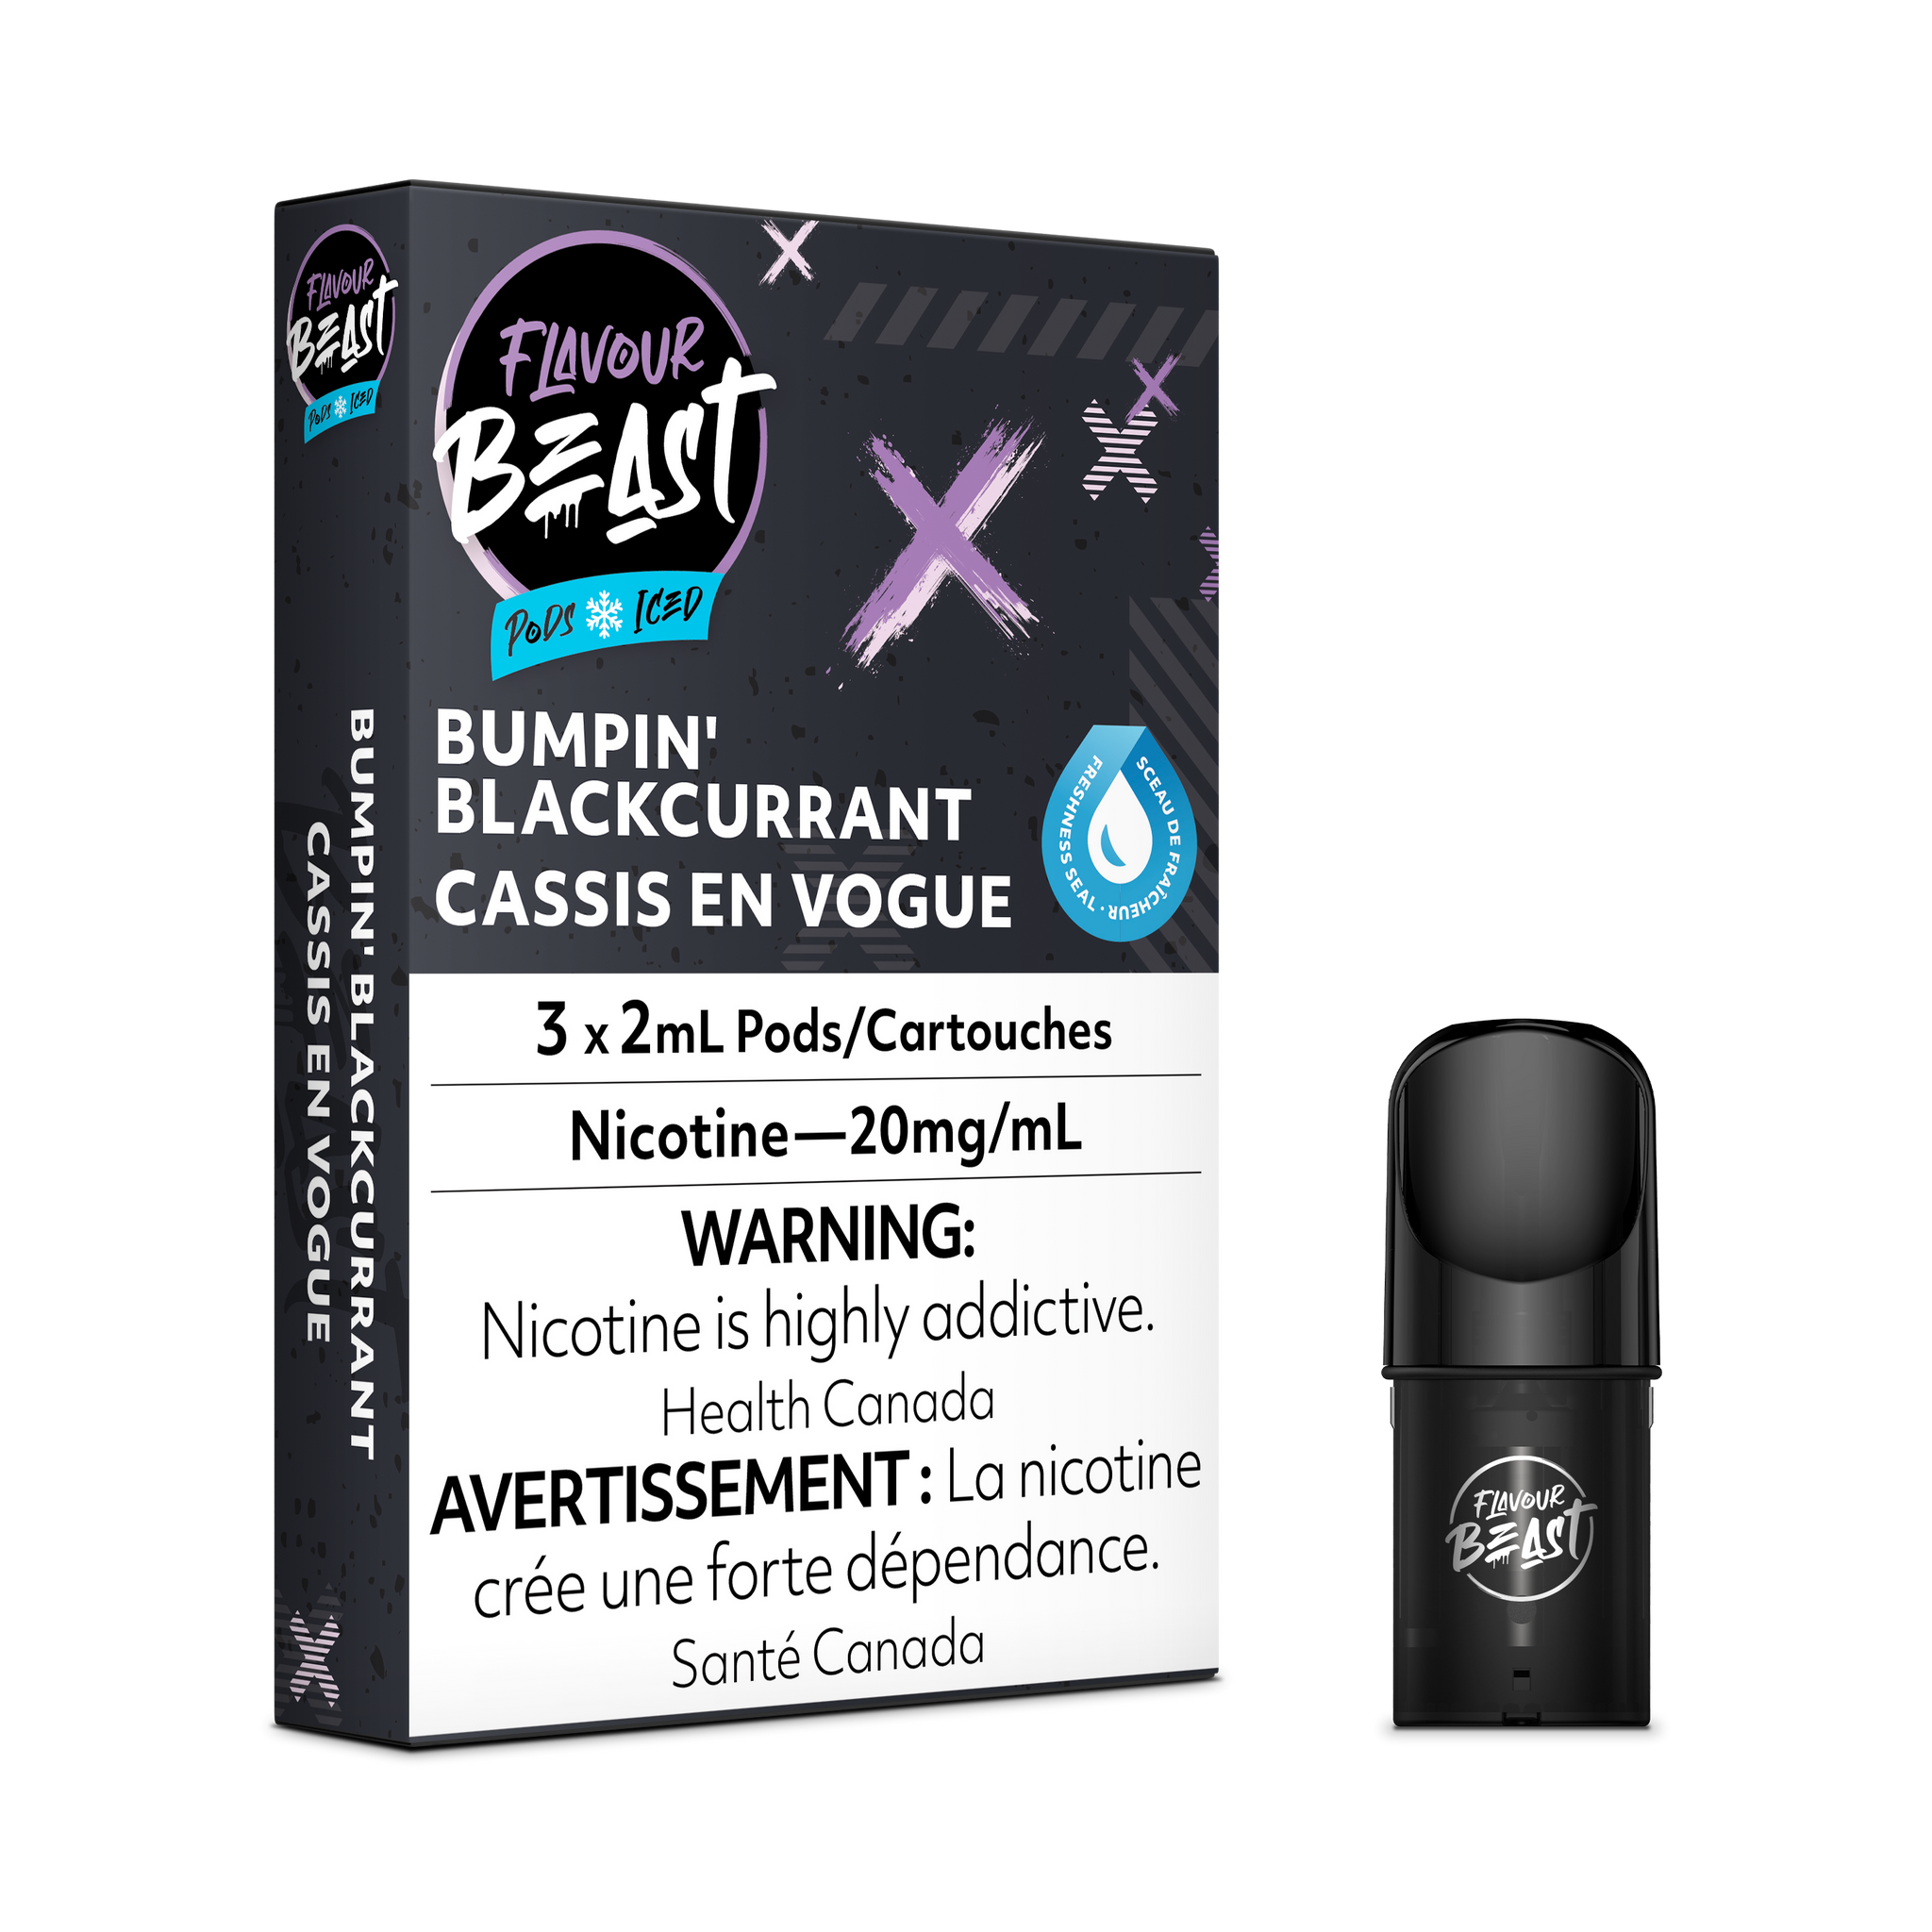 Flavour Beast Pod Pack - Bumpin' Blackcurrant Iced